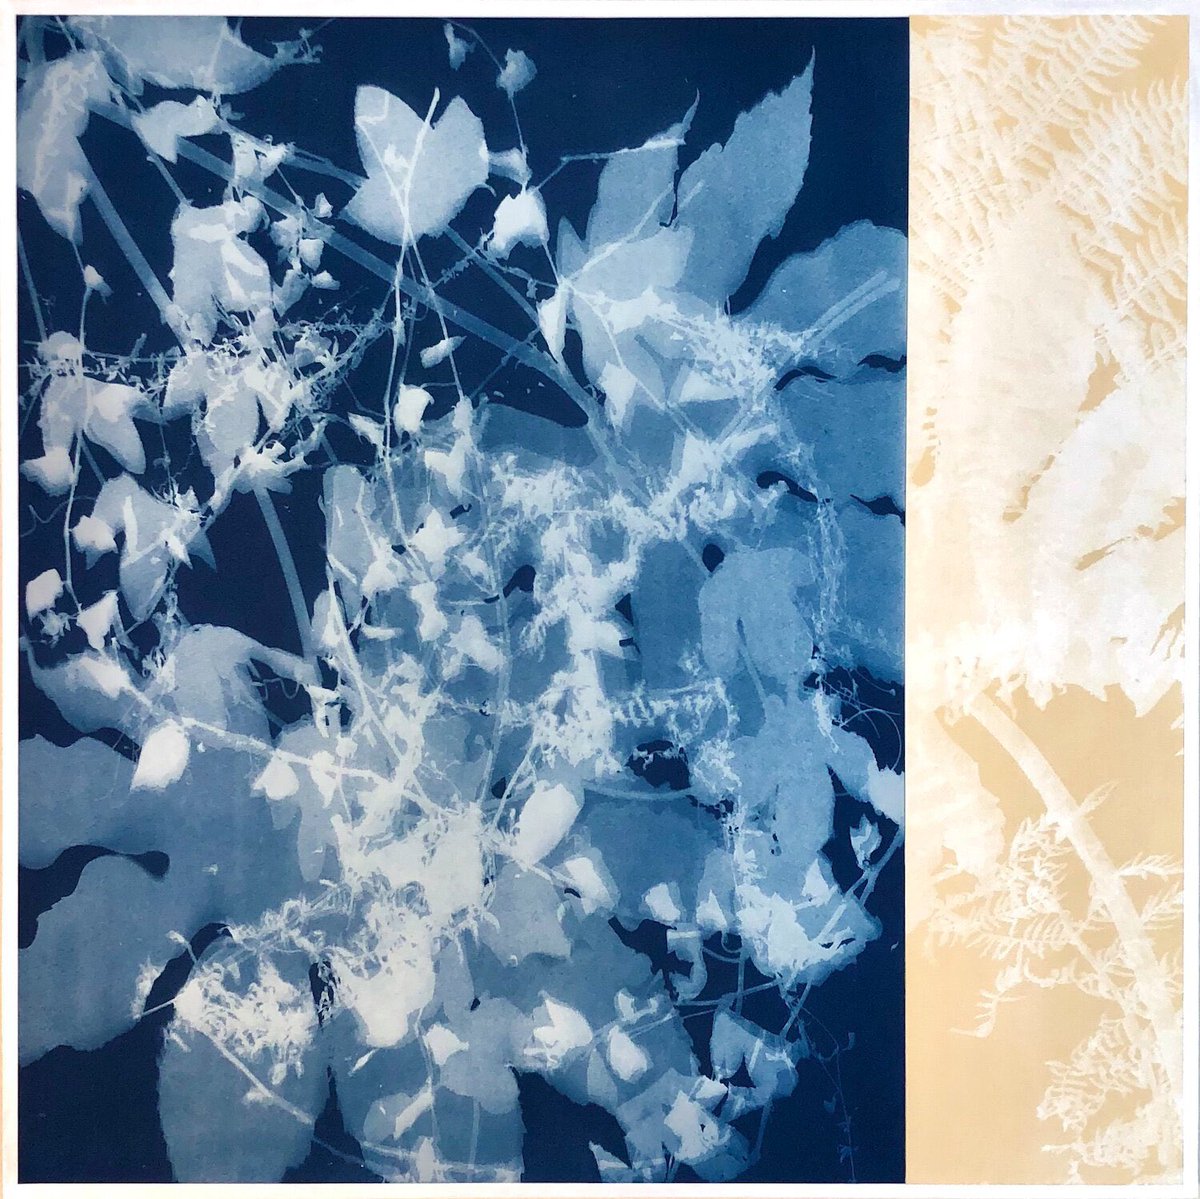 change is the only constant, 2021. cyanotype. christine so